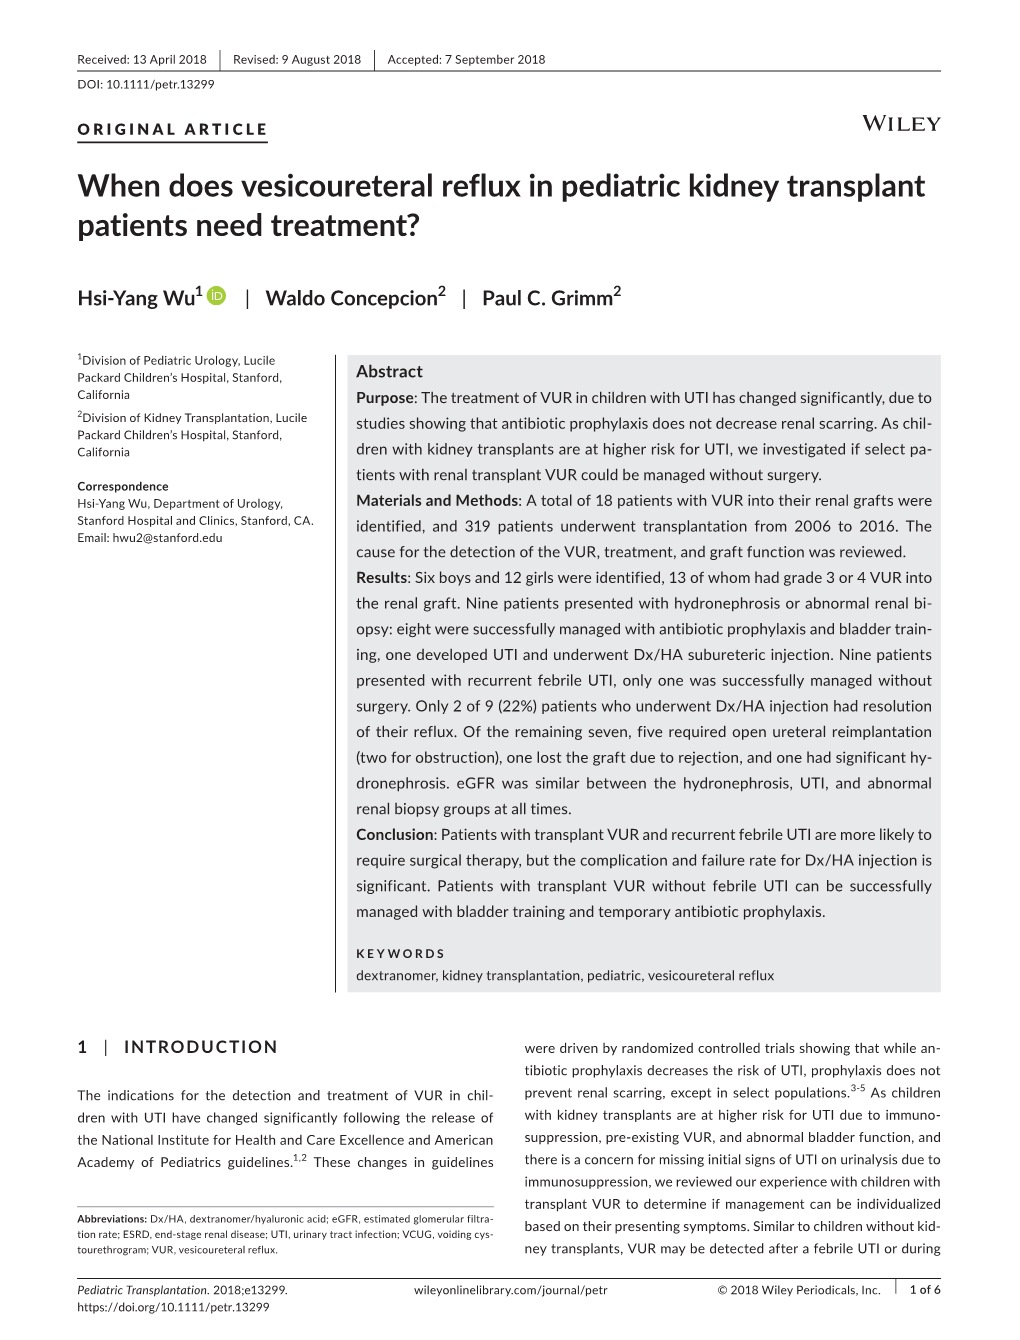 When Does Vesicoureteral Reflux in Pediatric Kidney Transplant Patients Need Treatment?